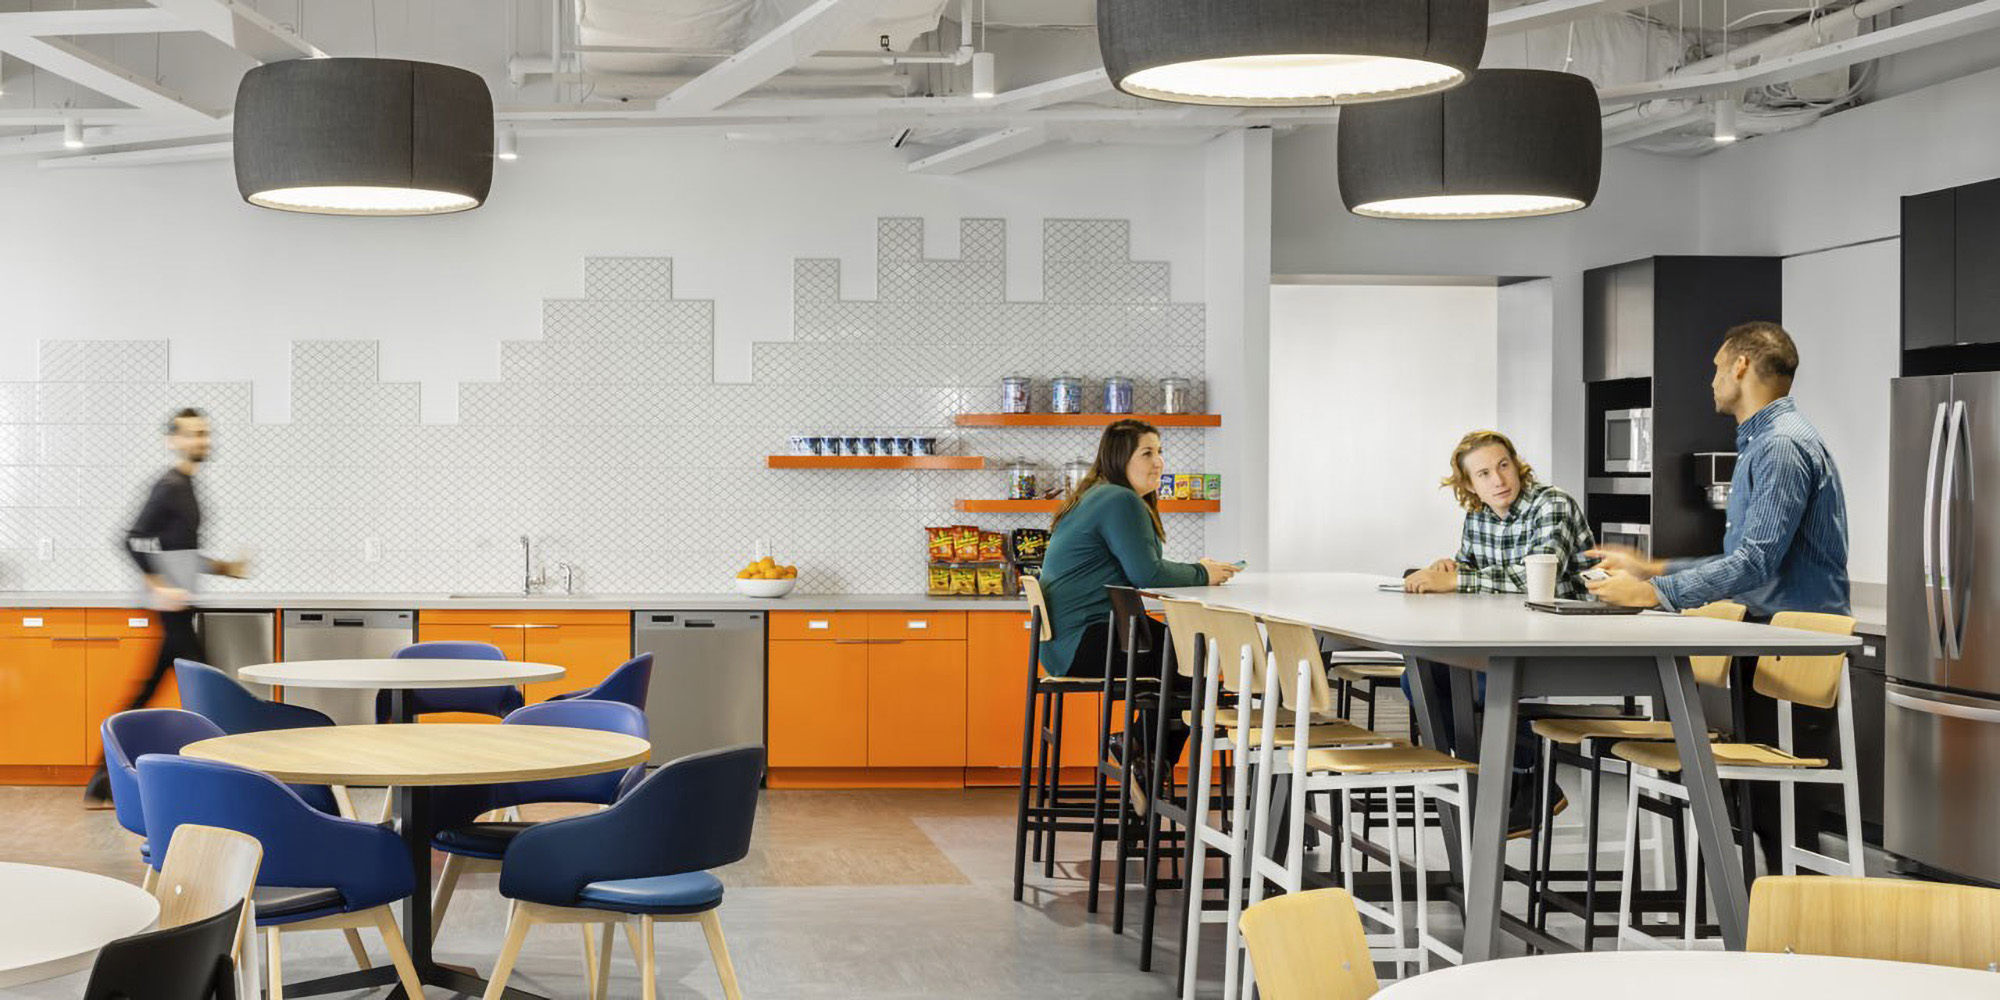 A lively work café with flexible seating at Cambridge Mobile Telematics HQ, designed by SMMA